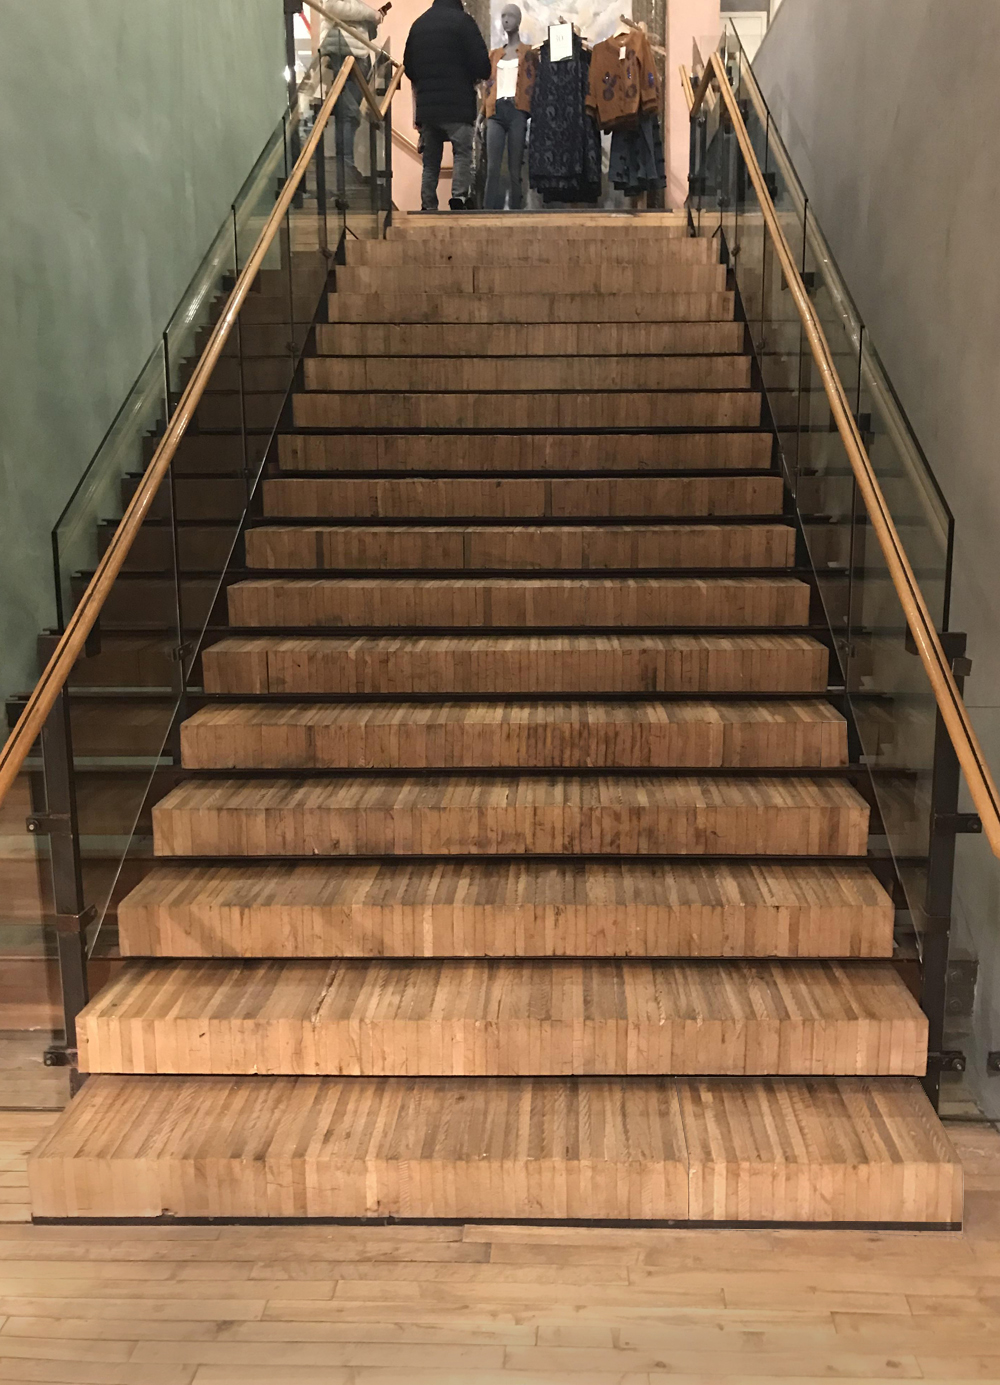 Reclaimed Stair Treads in Retail Environment